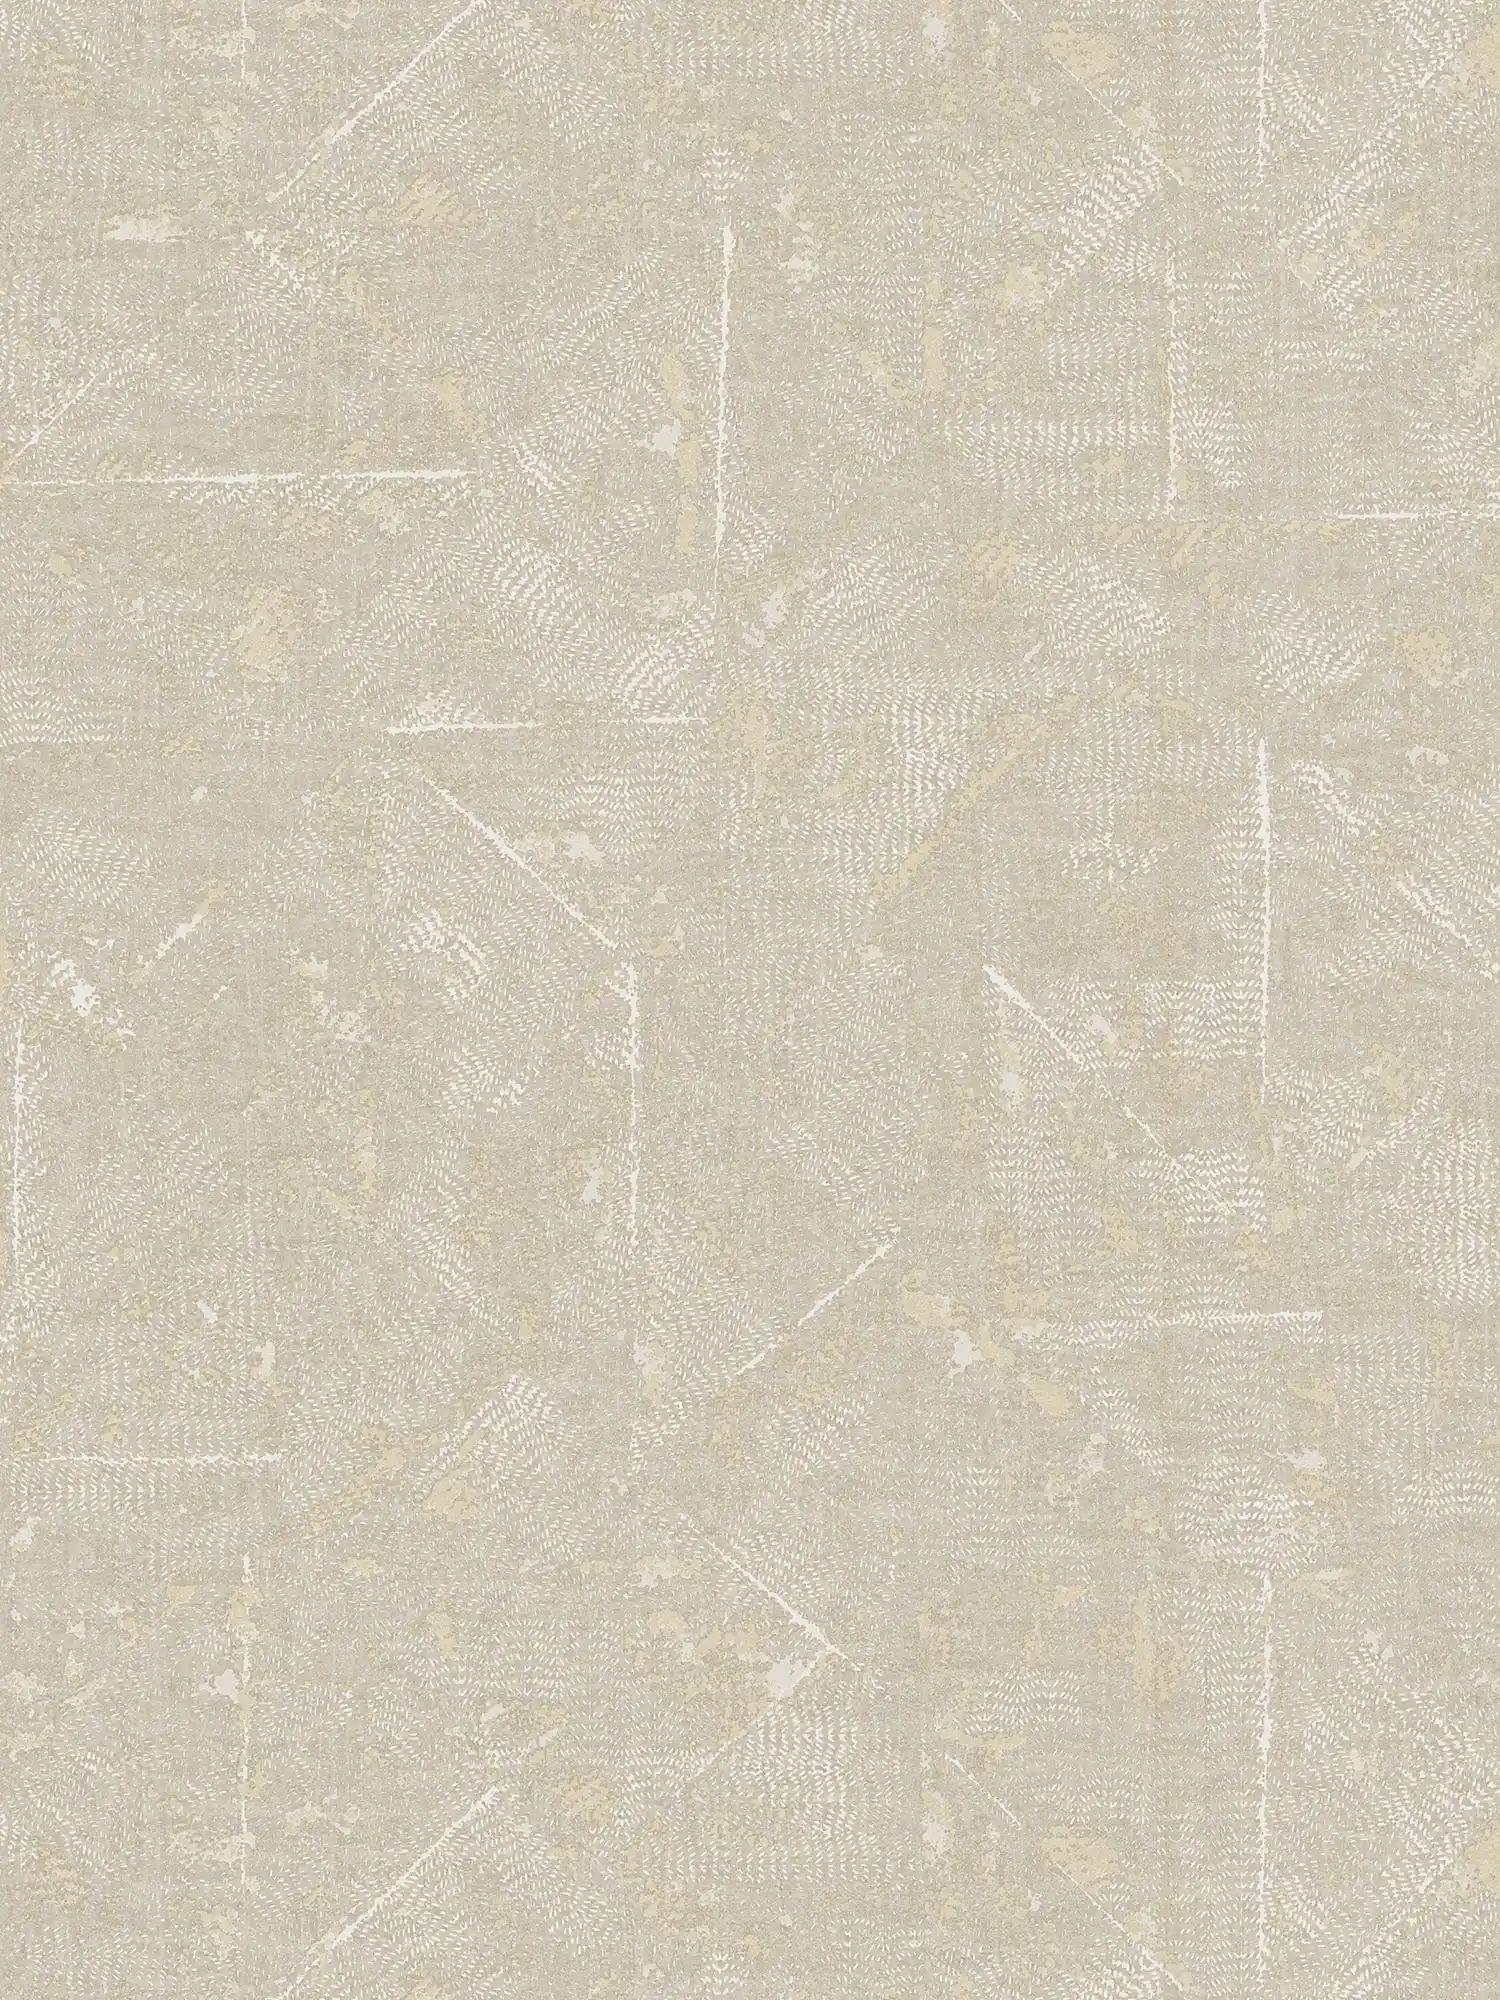 wallpaper beige patterned with silver accents - grey, beige, silver
